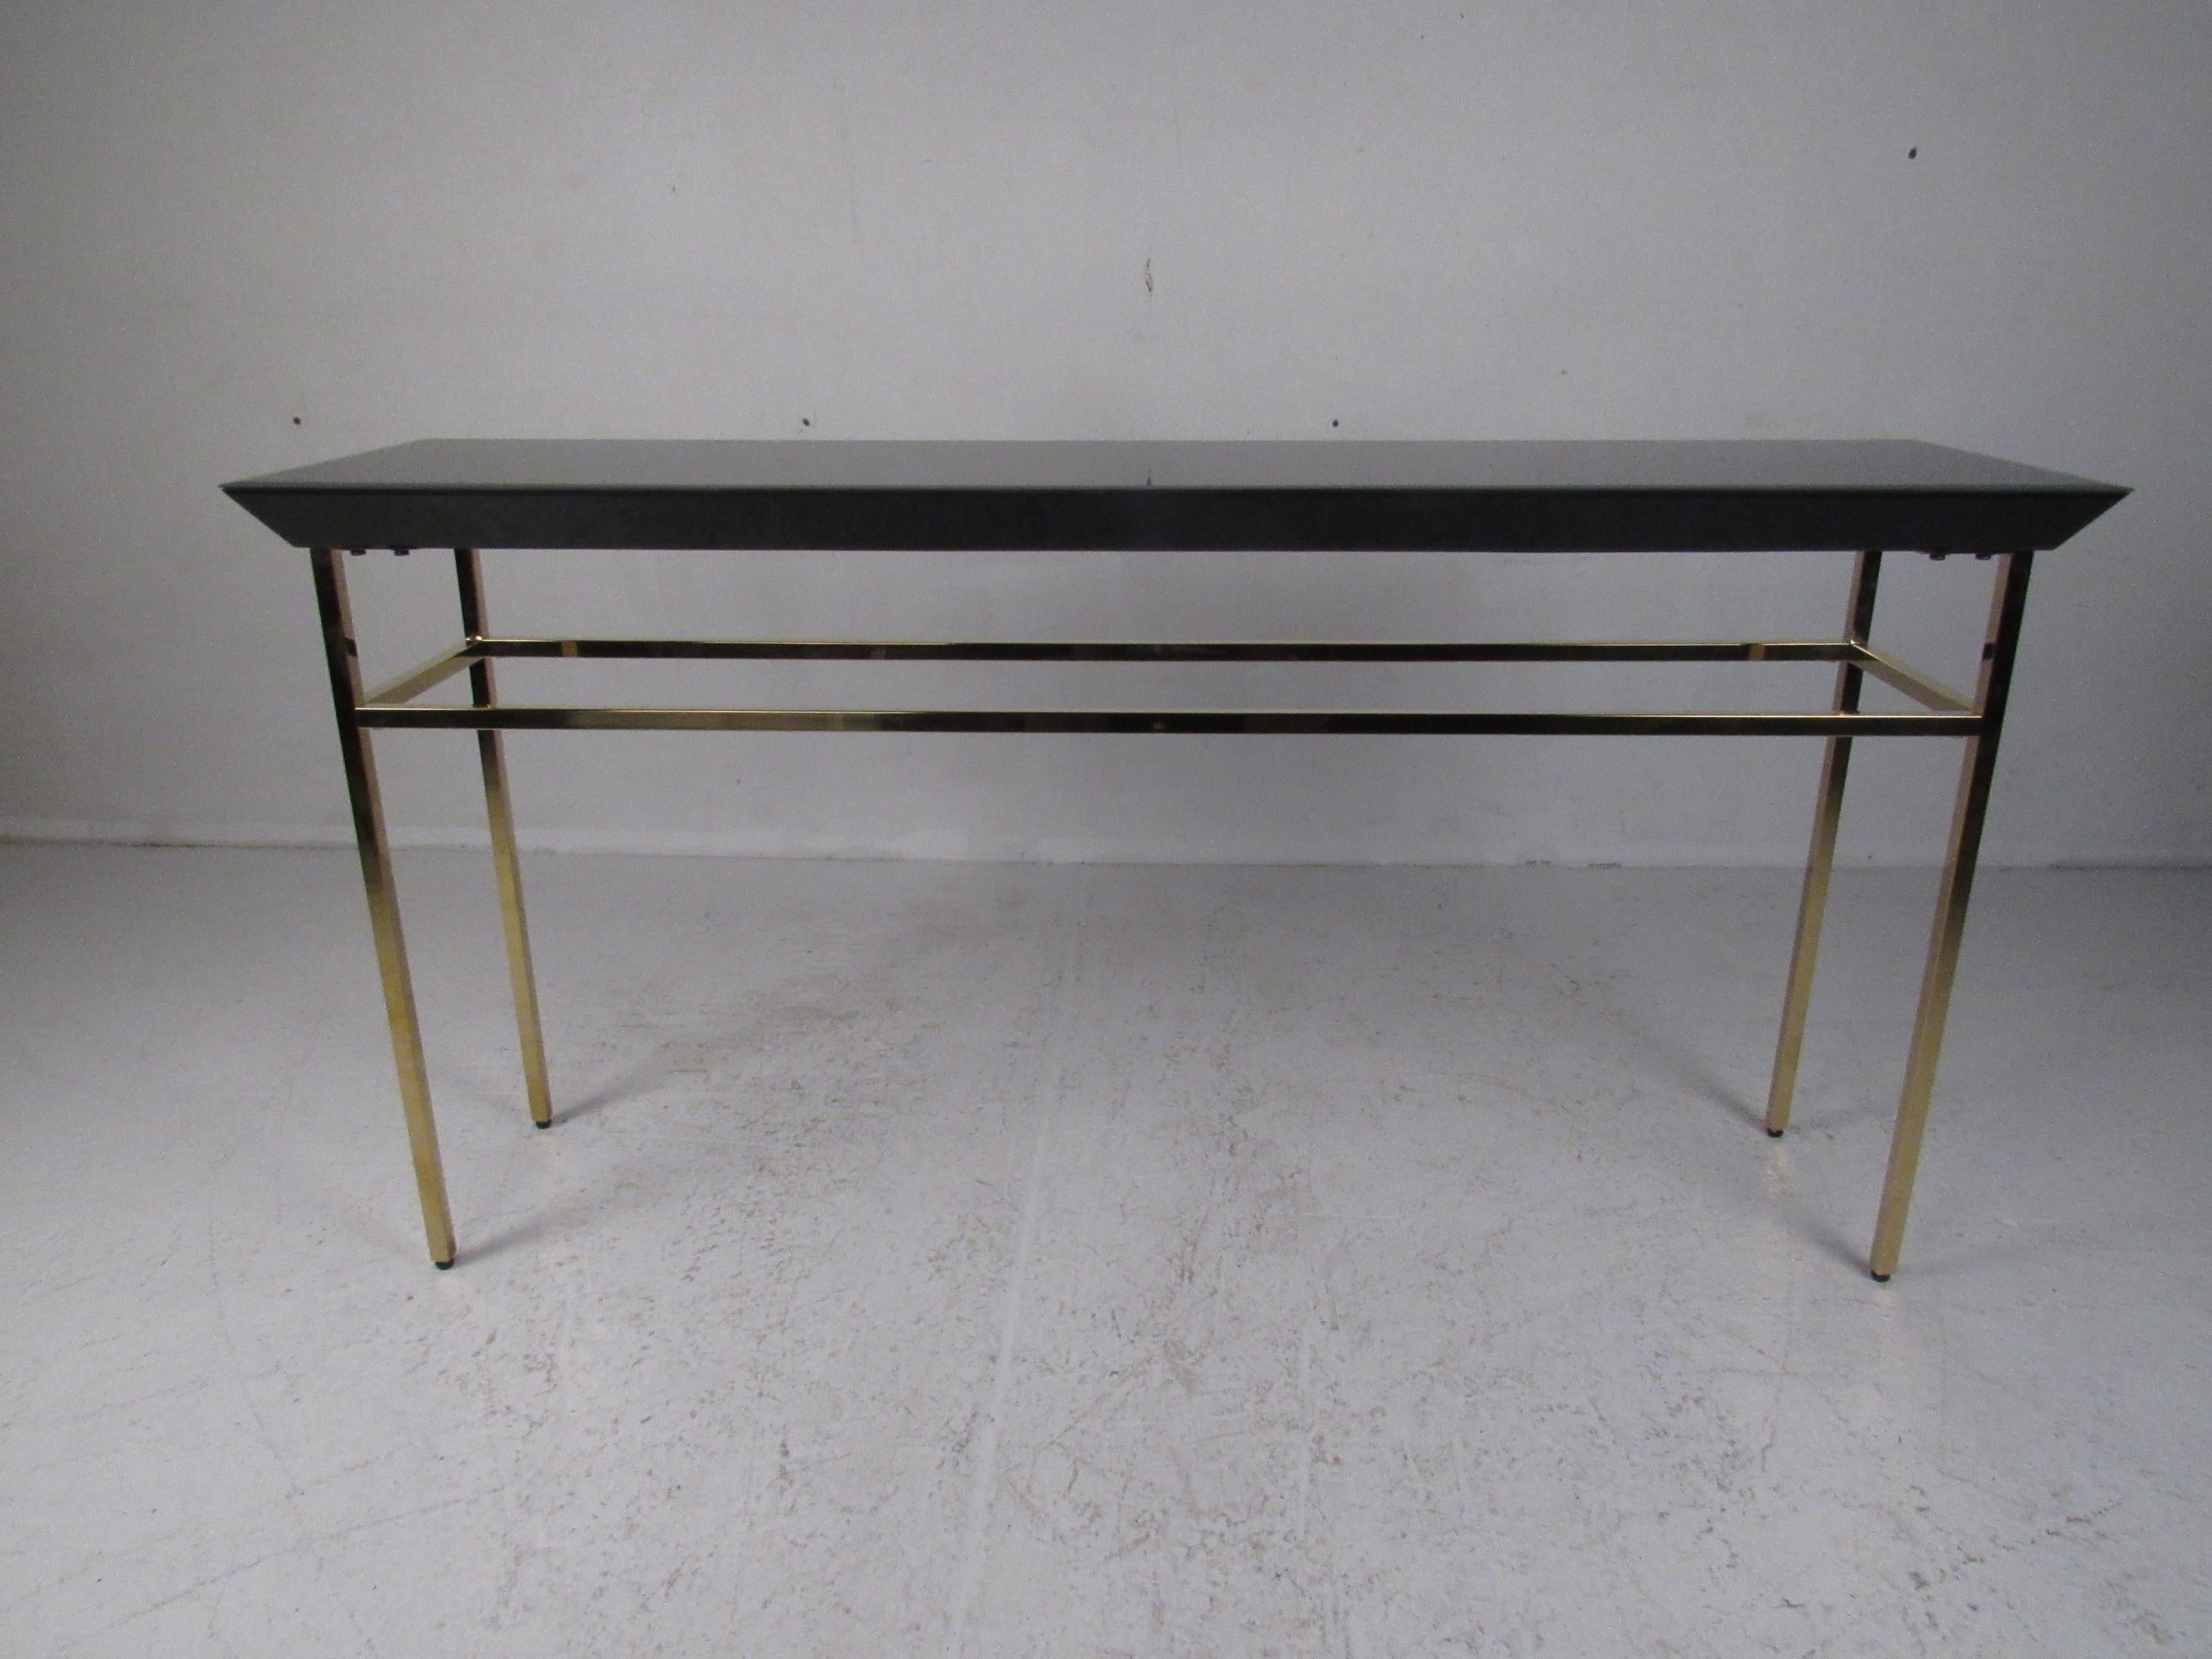 This stunning midcentury style hall table features a black glass top with beveled edges. A sturdy metal base with stretchers supports the rectangular tabletop. This stylish piece looks great in any entryway, hallway, and even behind the sofa. Please